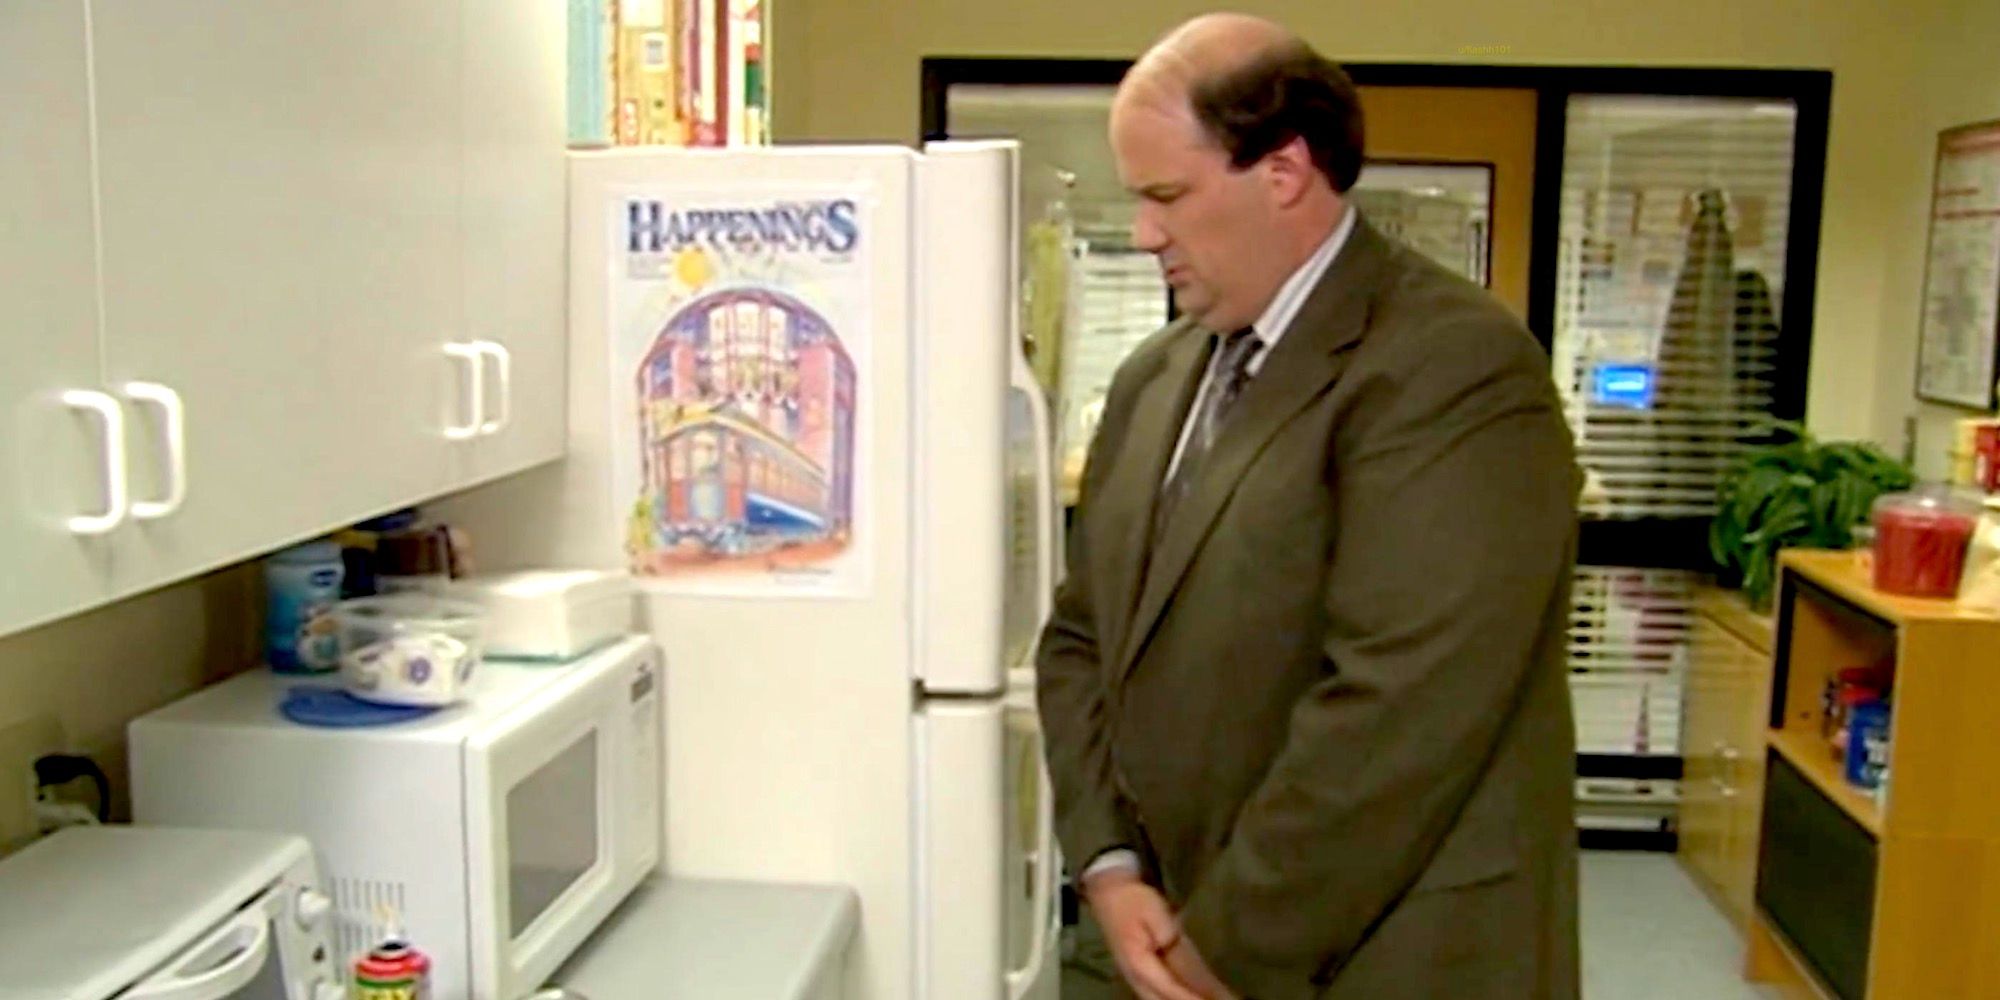 Kevin Using The Microwave In The Office